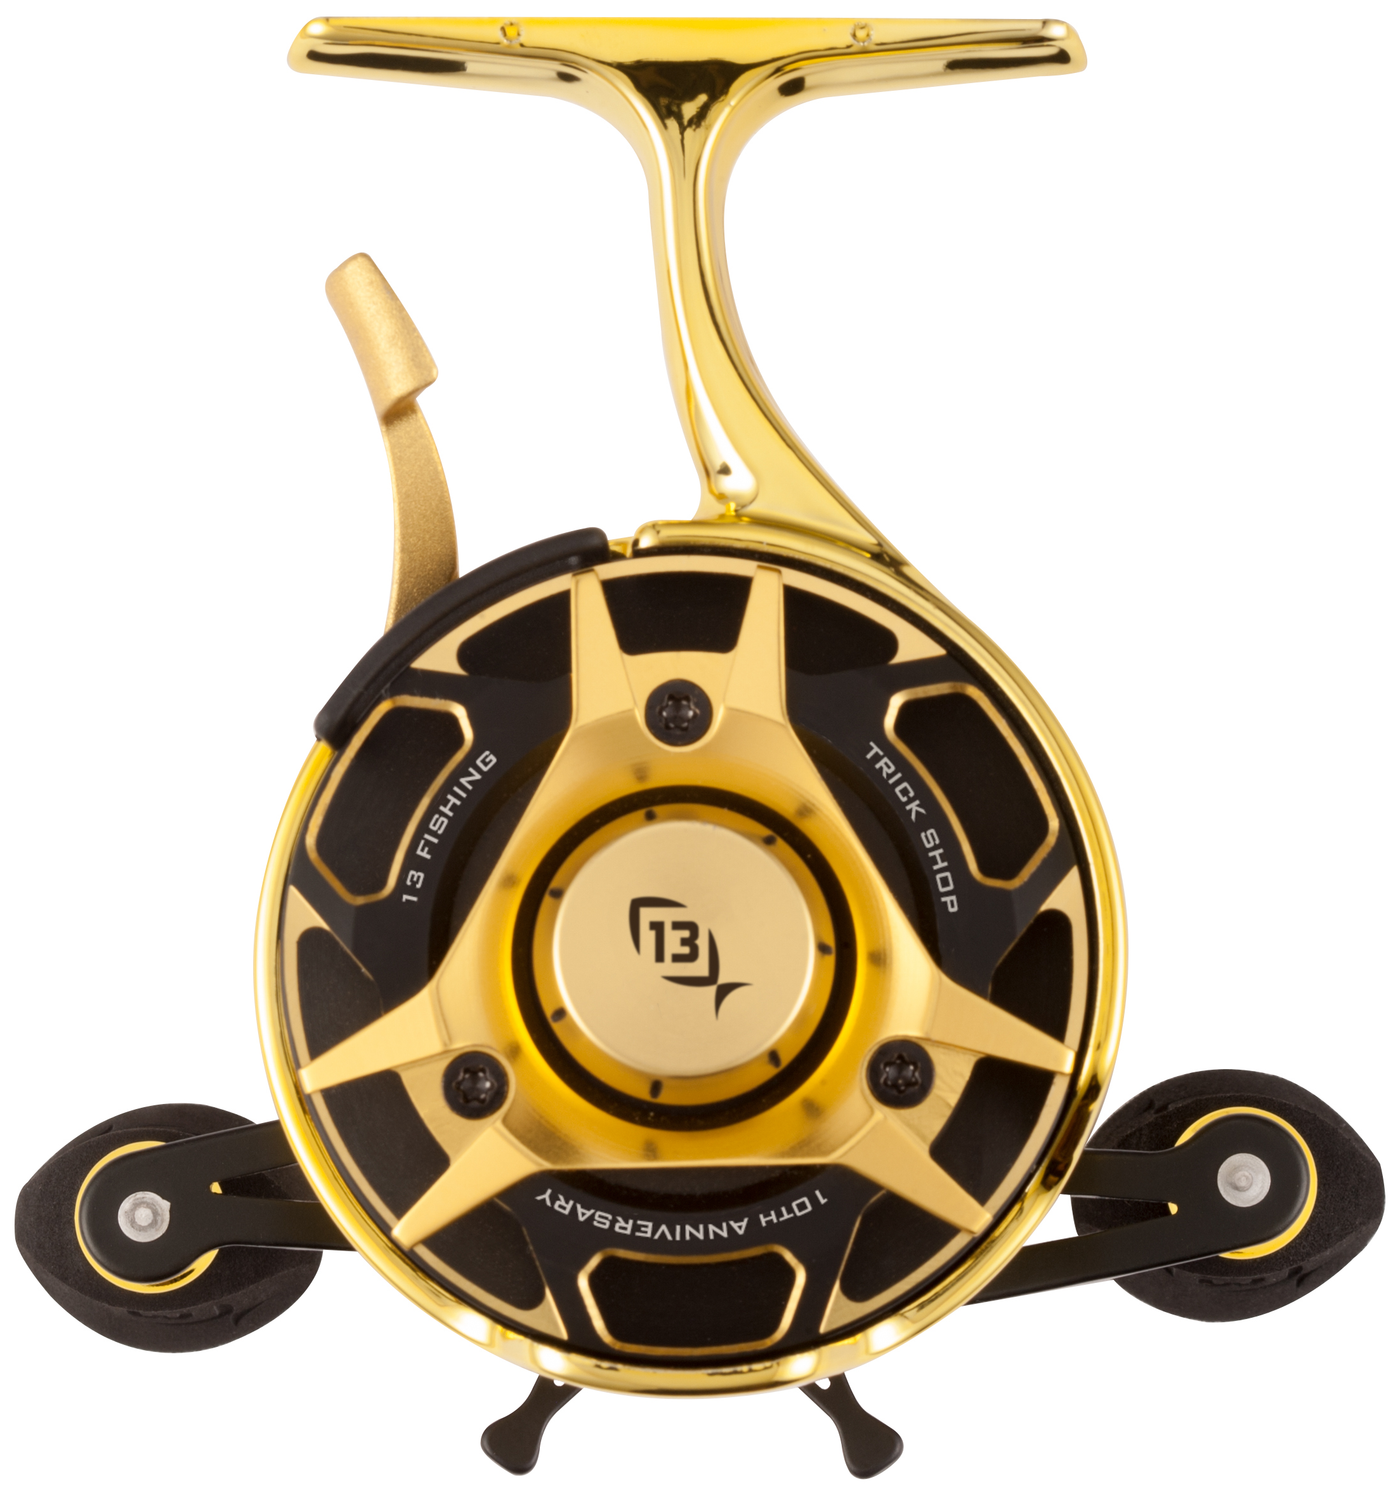 Introducing the 13 Fishing Black Betty FreeFall Ice Reel 